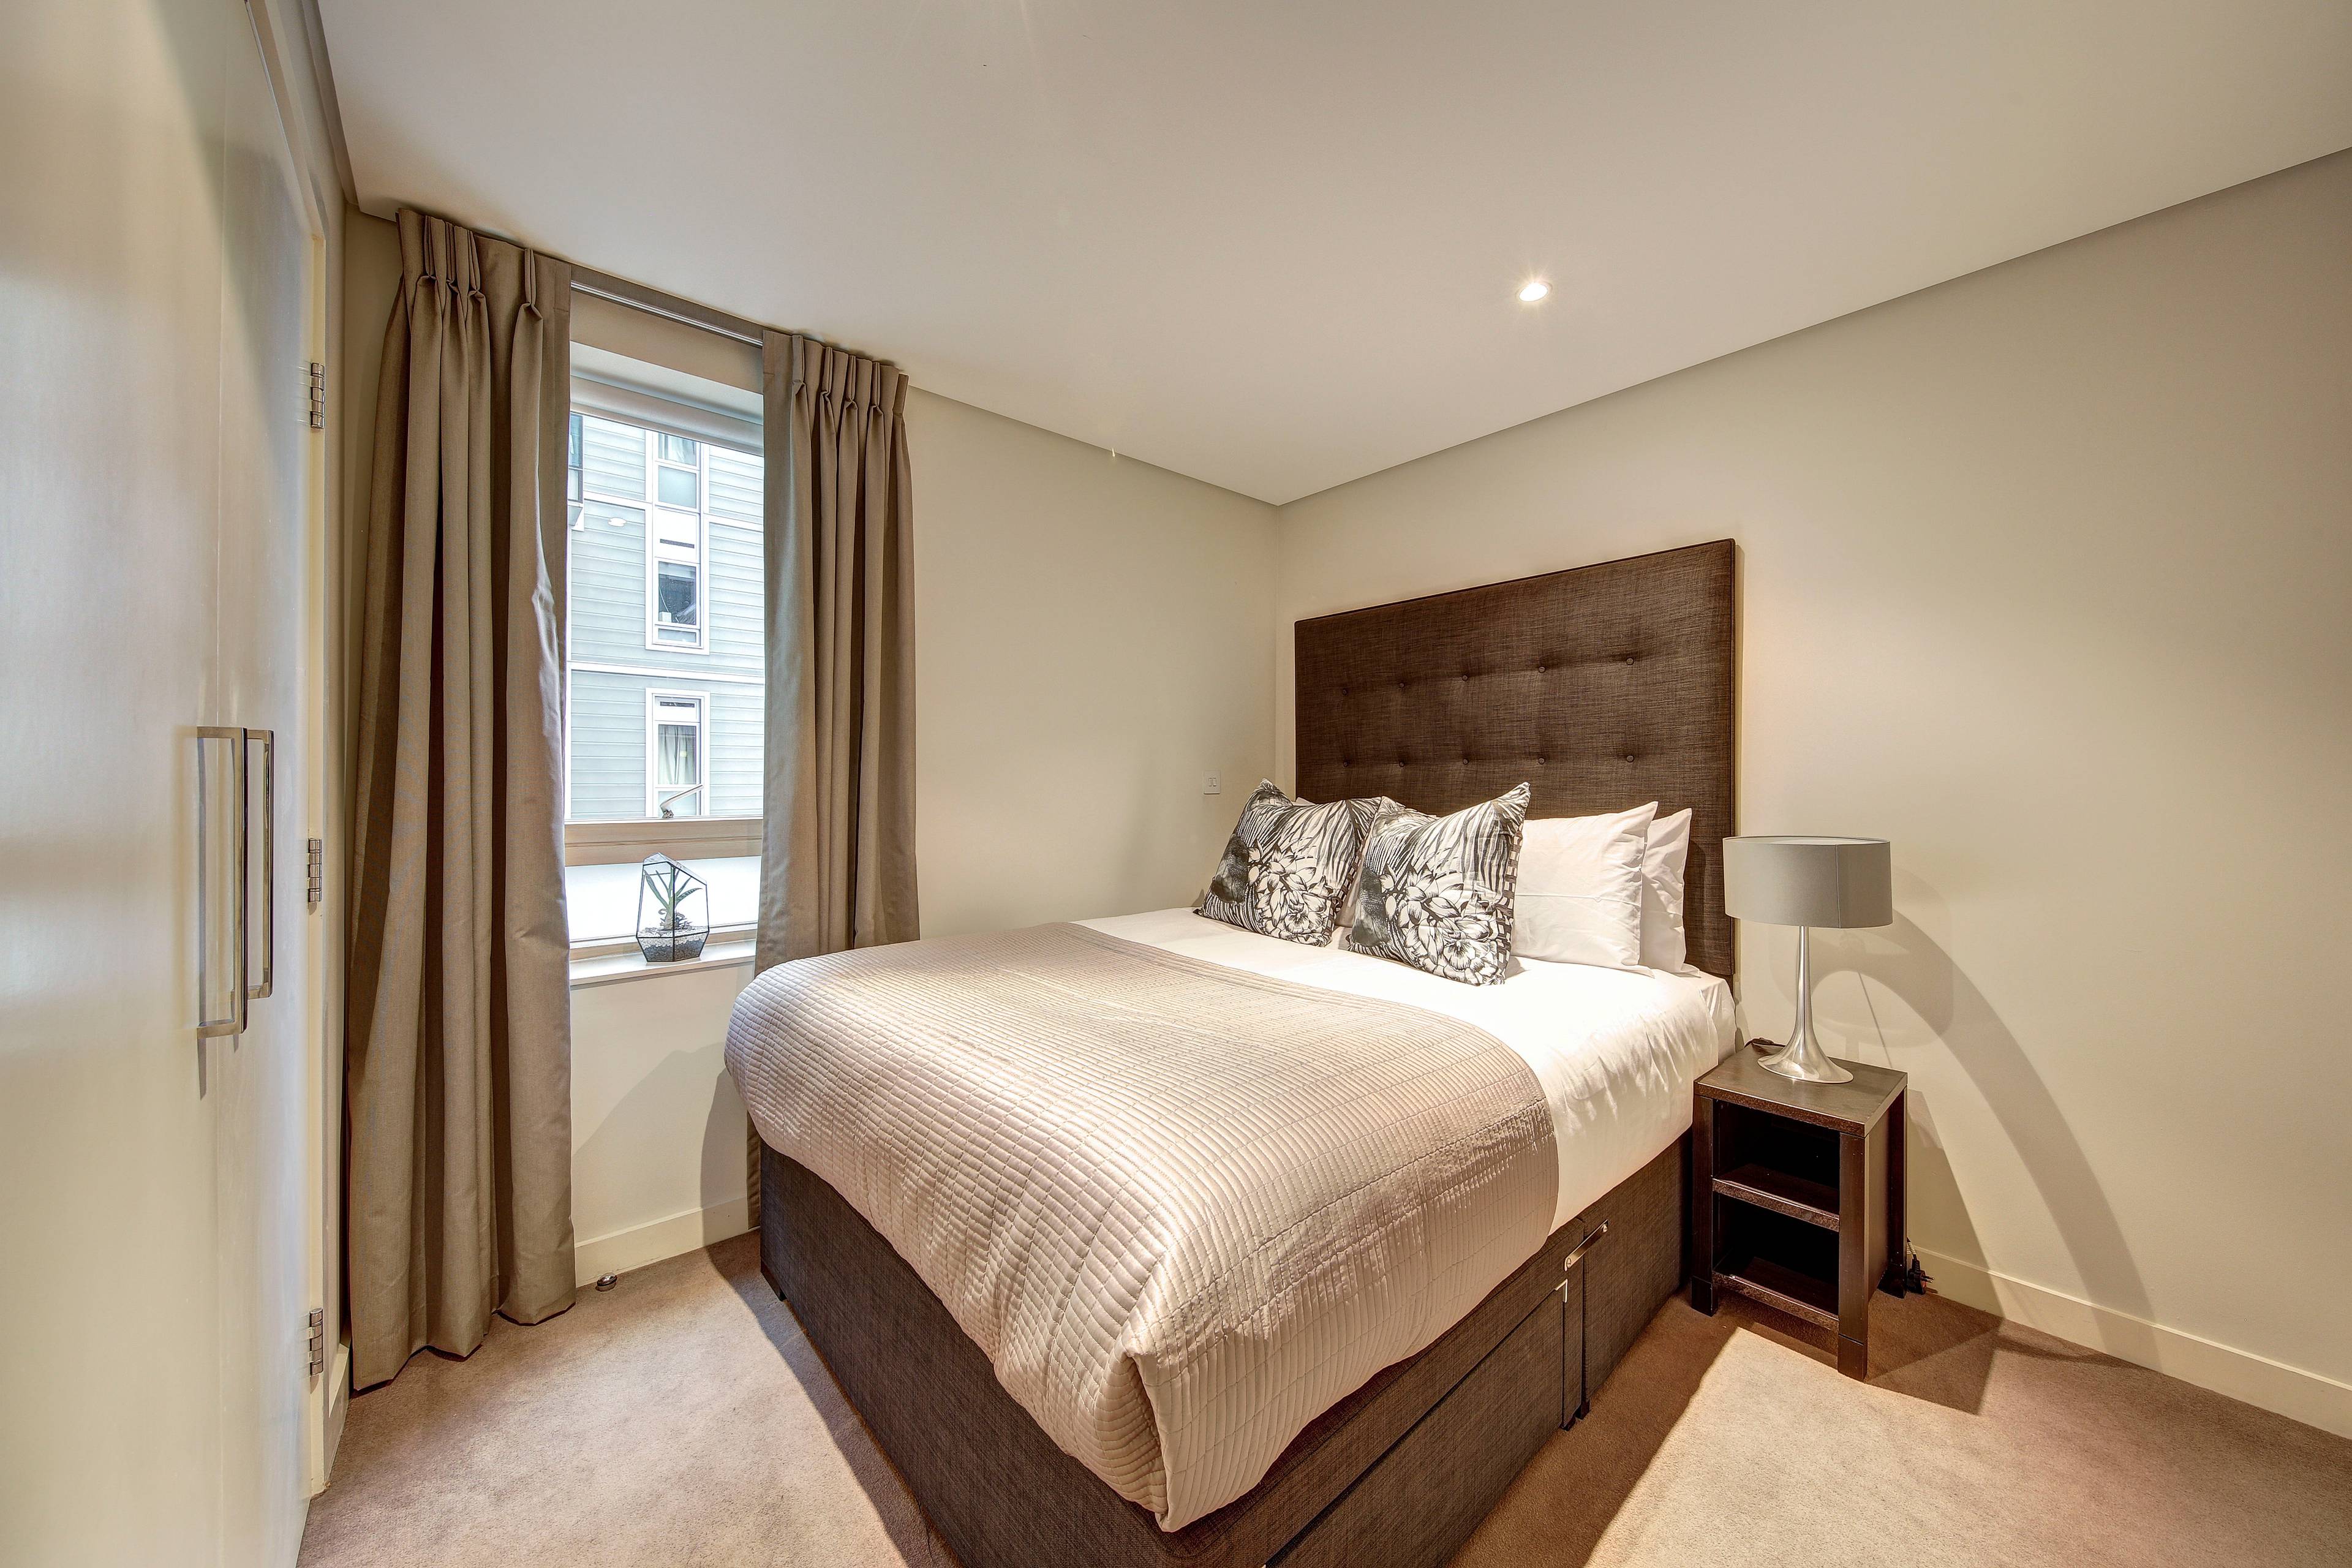 A beautifully designed one bedroom luxury apartment situated on the seventh floor of this prestigious building, which features a concierge, lift service and secure underground parking.